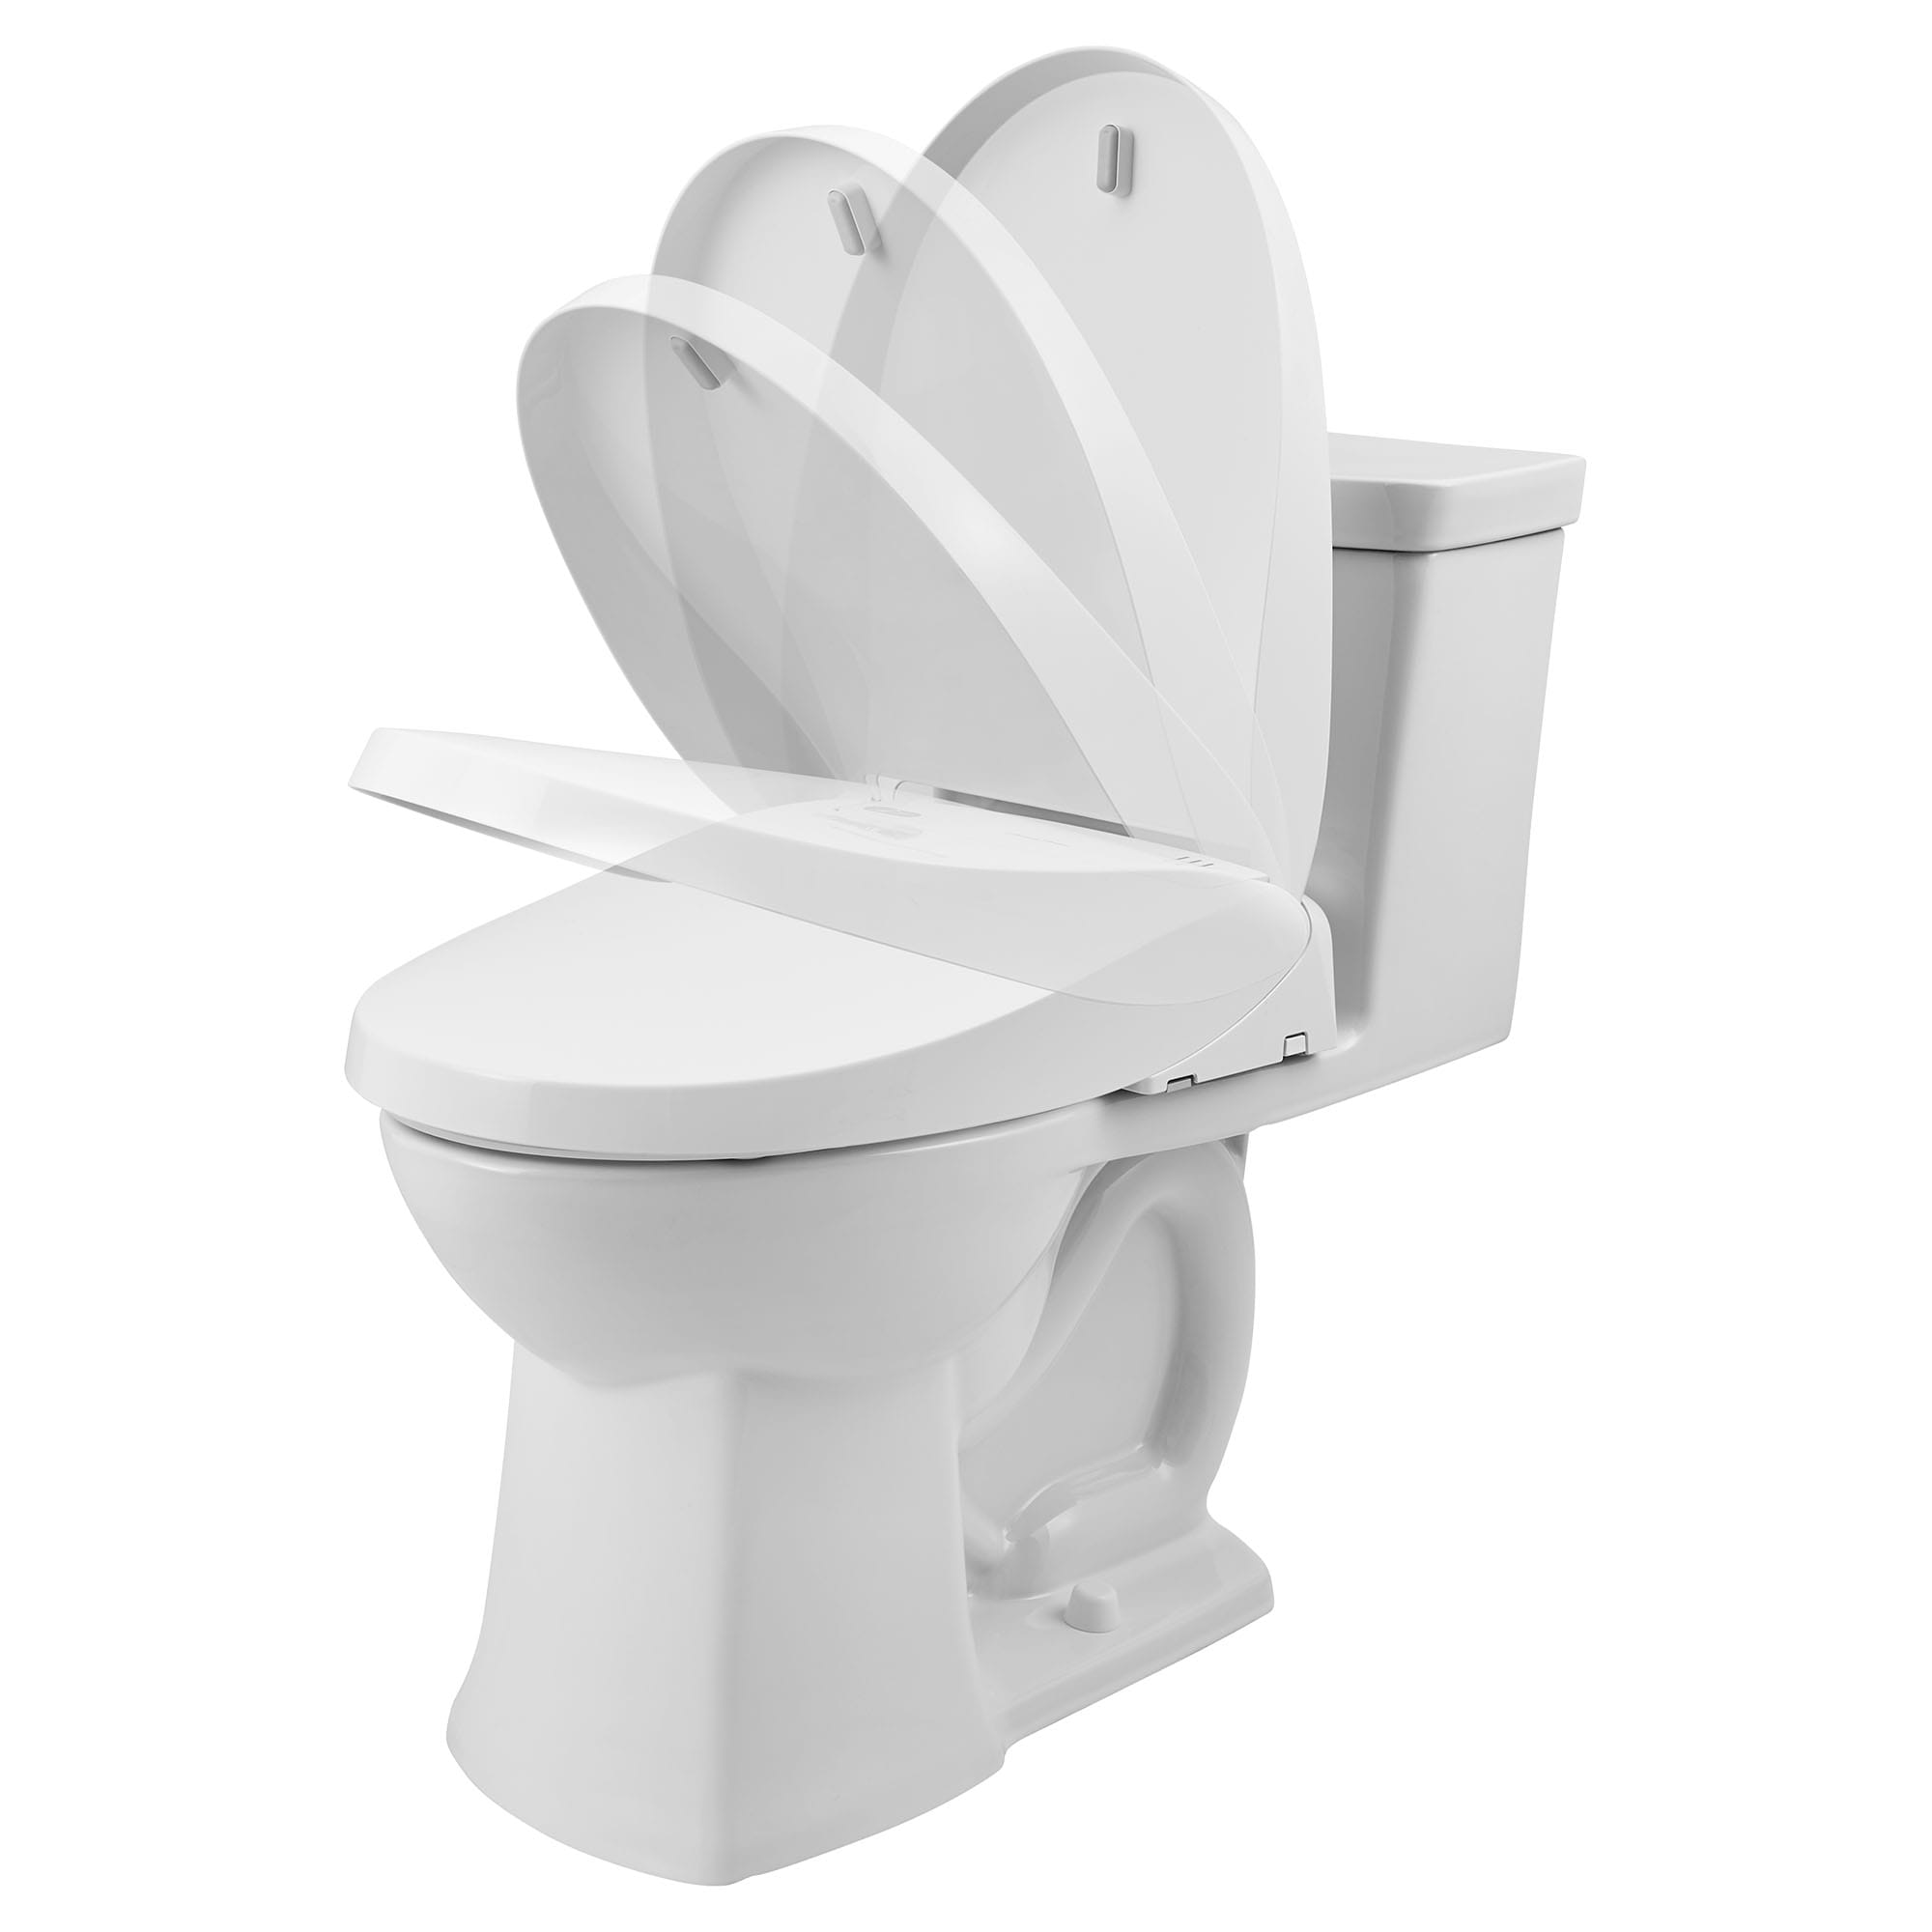 Townsend VorMax One Piece 128 gpf 48 Lpf Chair Height Elongated Toilet with Seat WHITE